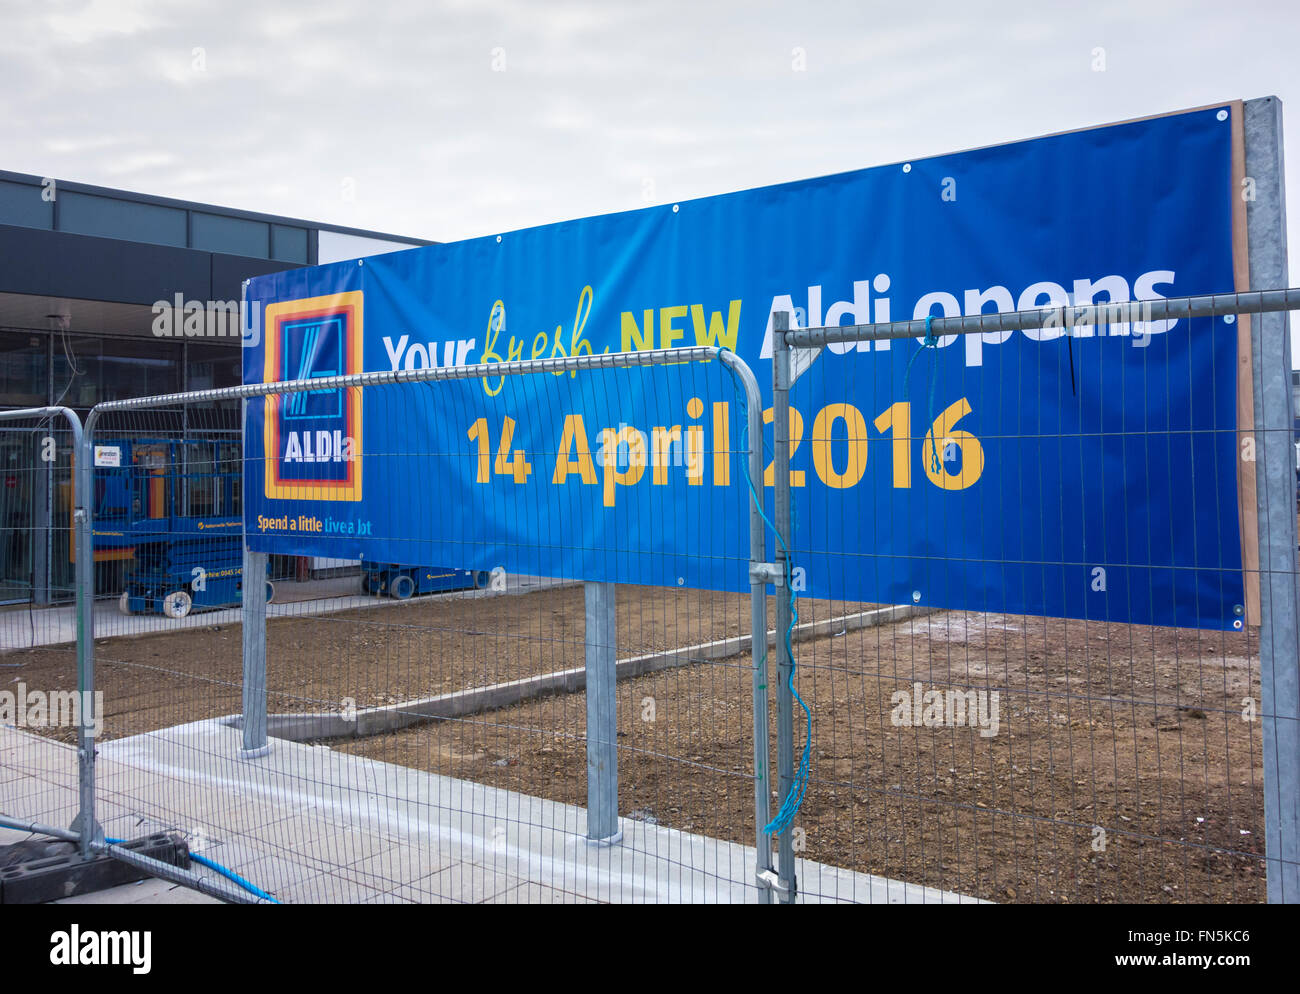 New Aldi supermarket under construction less than 100 metres from Asda store in Billingham, north east England Stock Photo